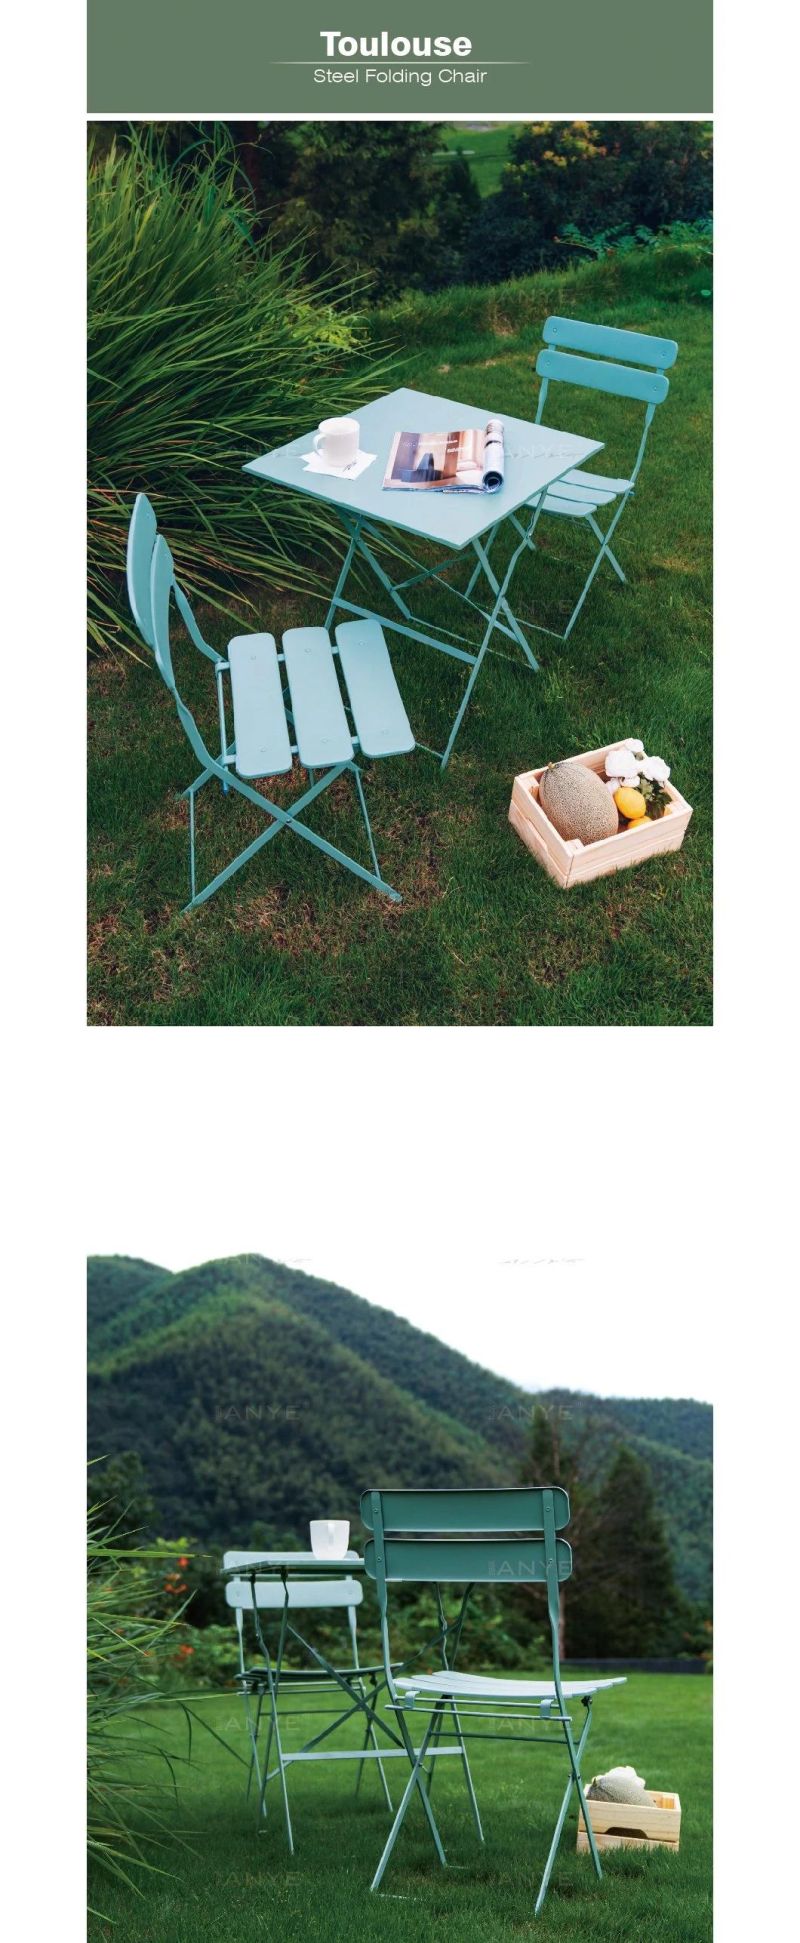 Portable Furniture Modern Design Eassy Carry Foldable Fishing Camping Outdoor Leisure Chair